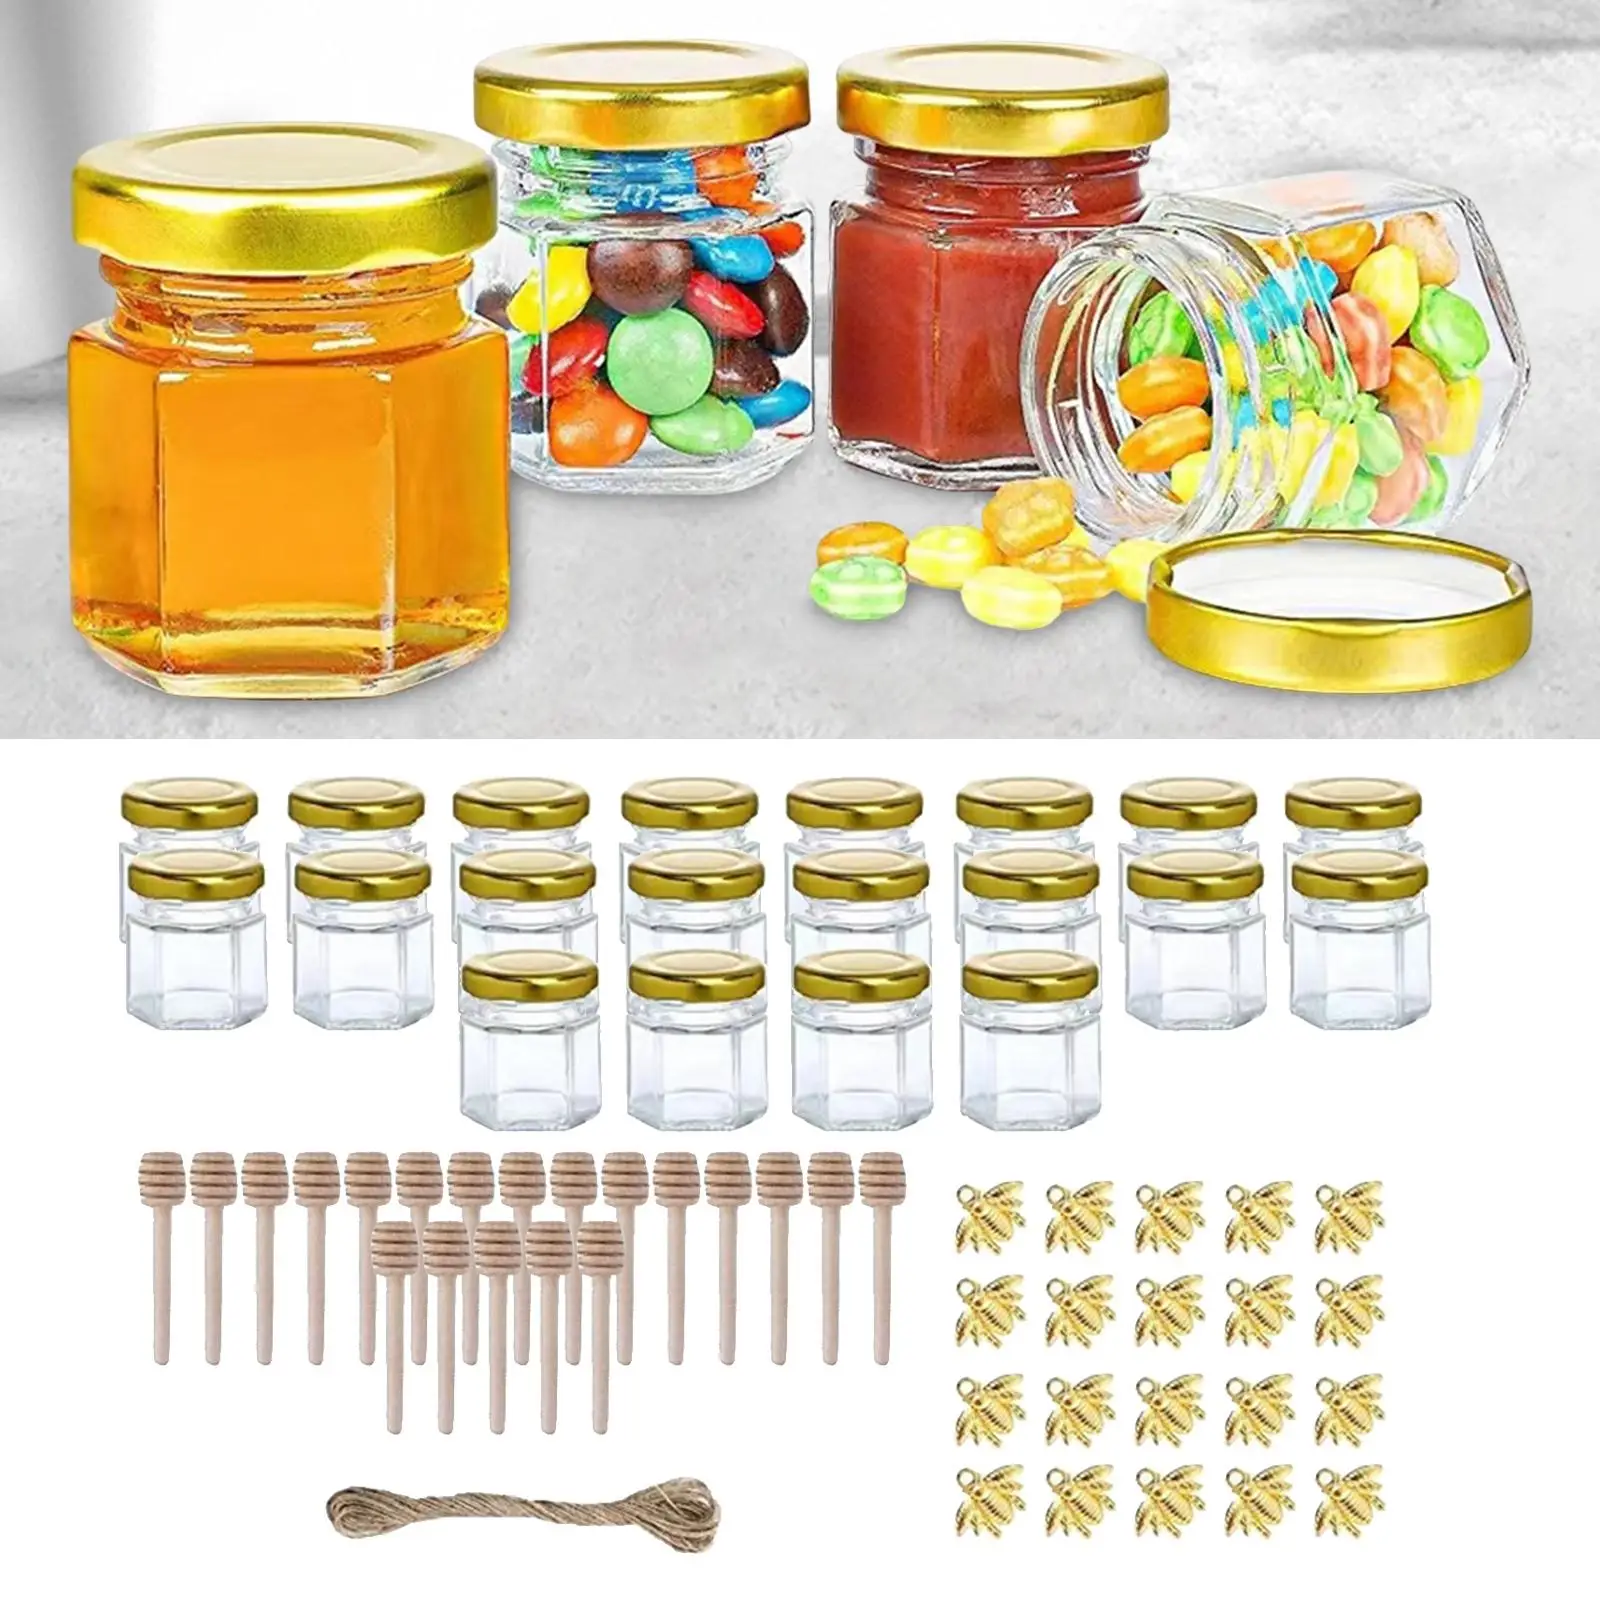 20 Pieces Small Glass Jars Airtight 45ml/1.5oz for Wedding Candle Making Party Favors Canning, Storing, and Decorative Purpose